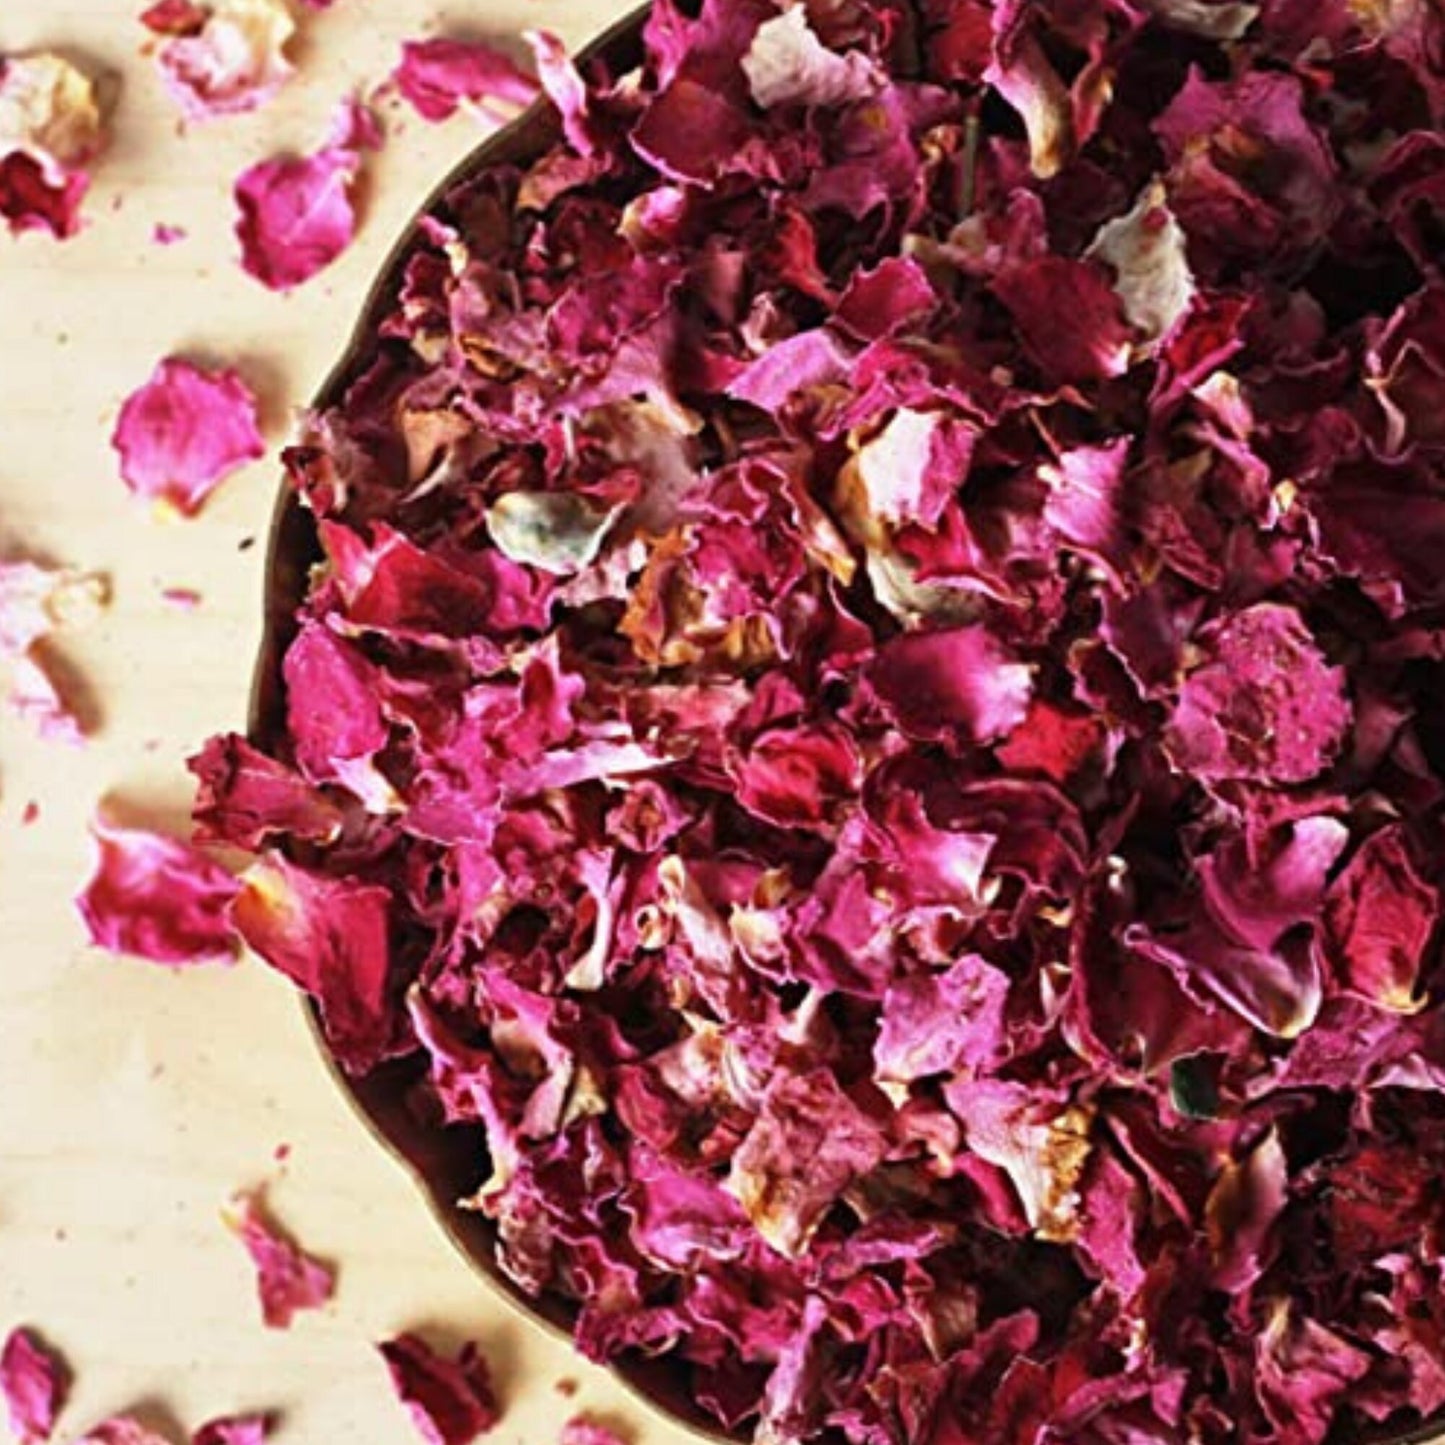 Dried Edible Rose Petals 100g by Hatton Hill  Edible rose petals, Dried  rose petals, Edible